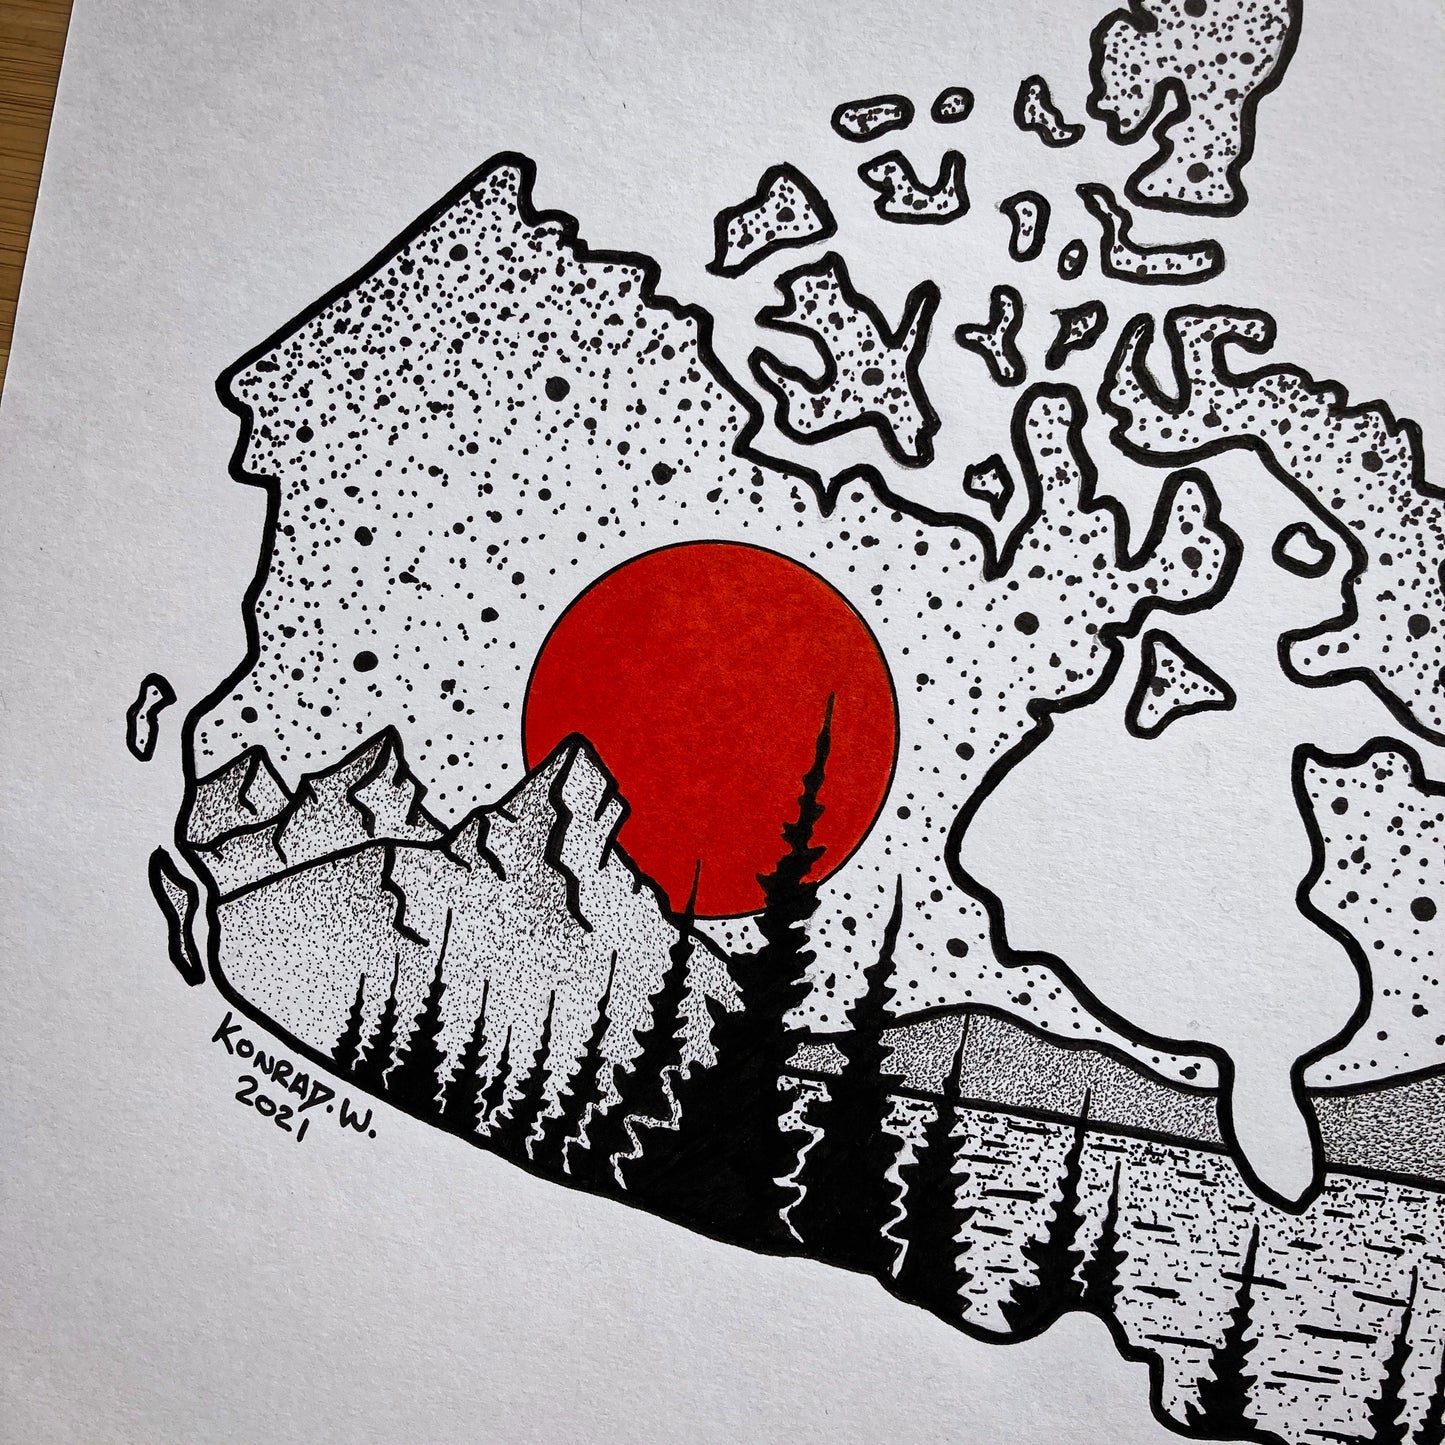 Canada Lake and Mountains - ORIGINAL 11x14 Pen and Ink Illustration